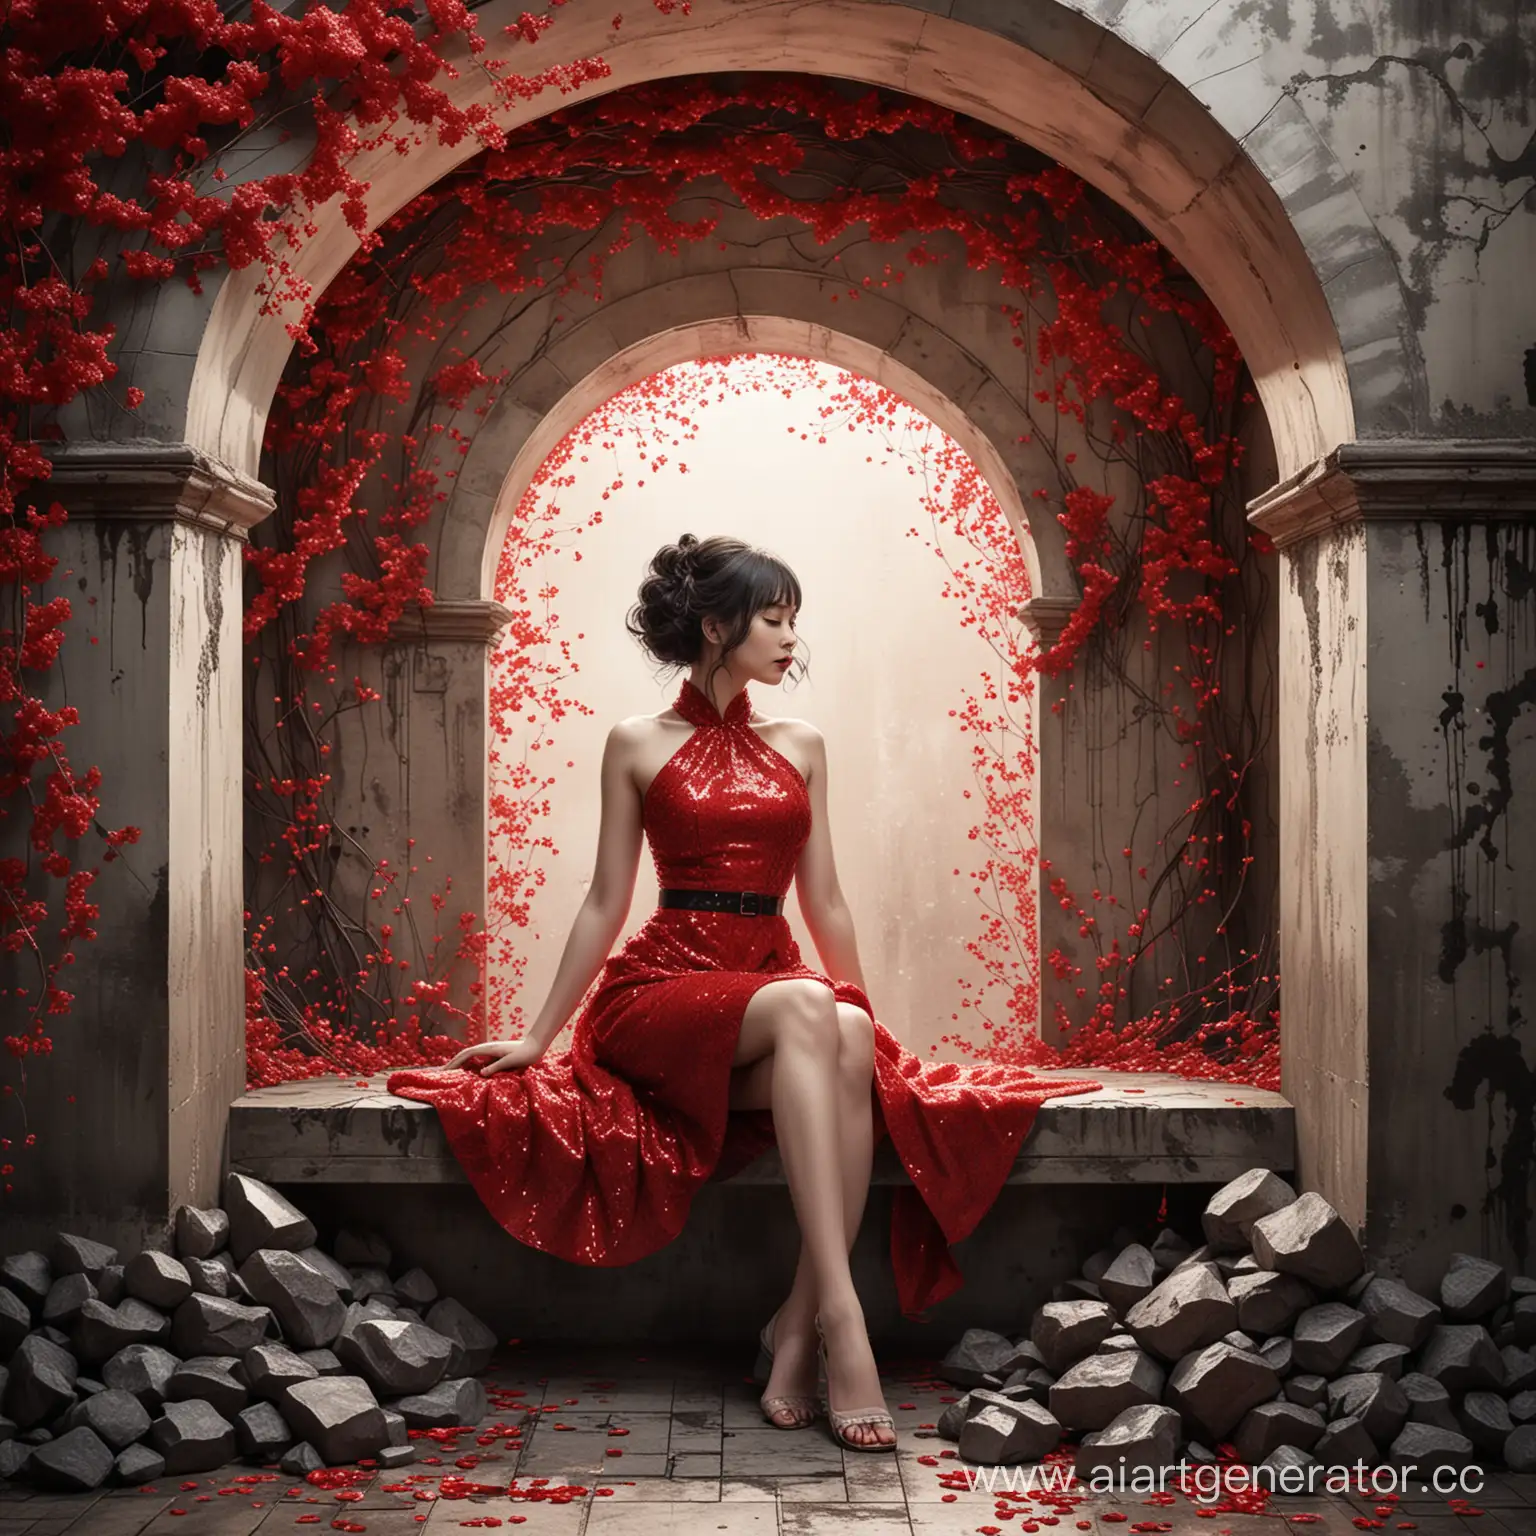 Dynamic-Dark-Spring-Illustration-Woman-in-Red-Sequins-Dress-in-ArchTunnel-Setting